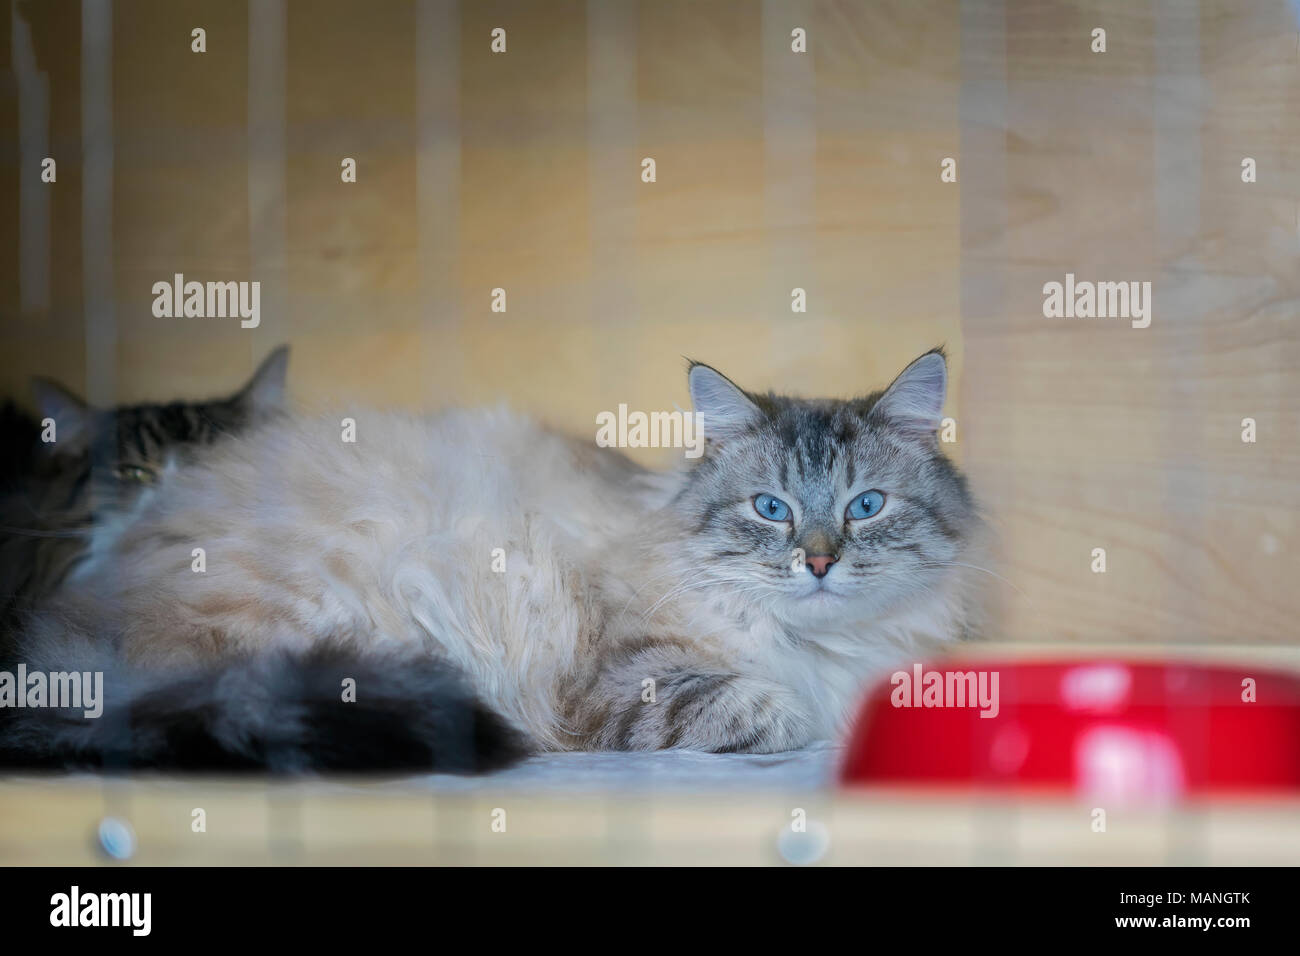 Adorable Fluffy Cat Of Siberian Breed With Beautiful Blue Eyes Lying On Cage In Shelter As On Cats Animal Exhibition But Waiting For Home Someone To Adopt Him Stock Photo Alamy